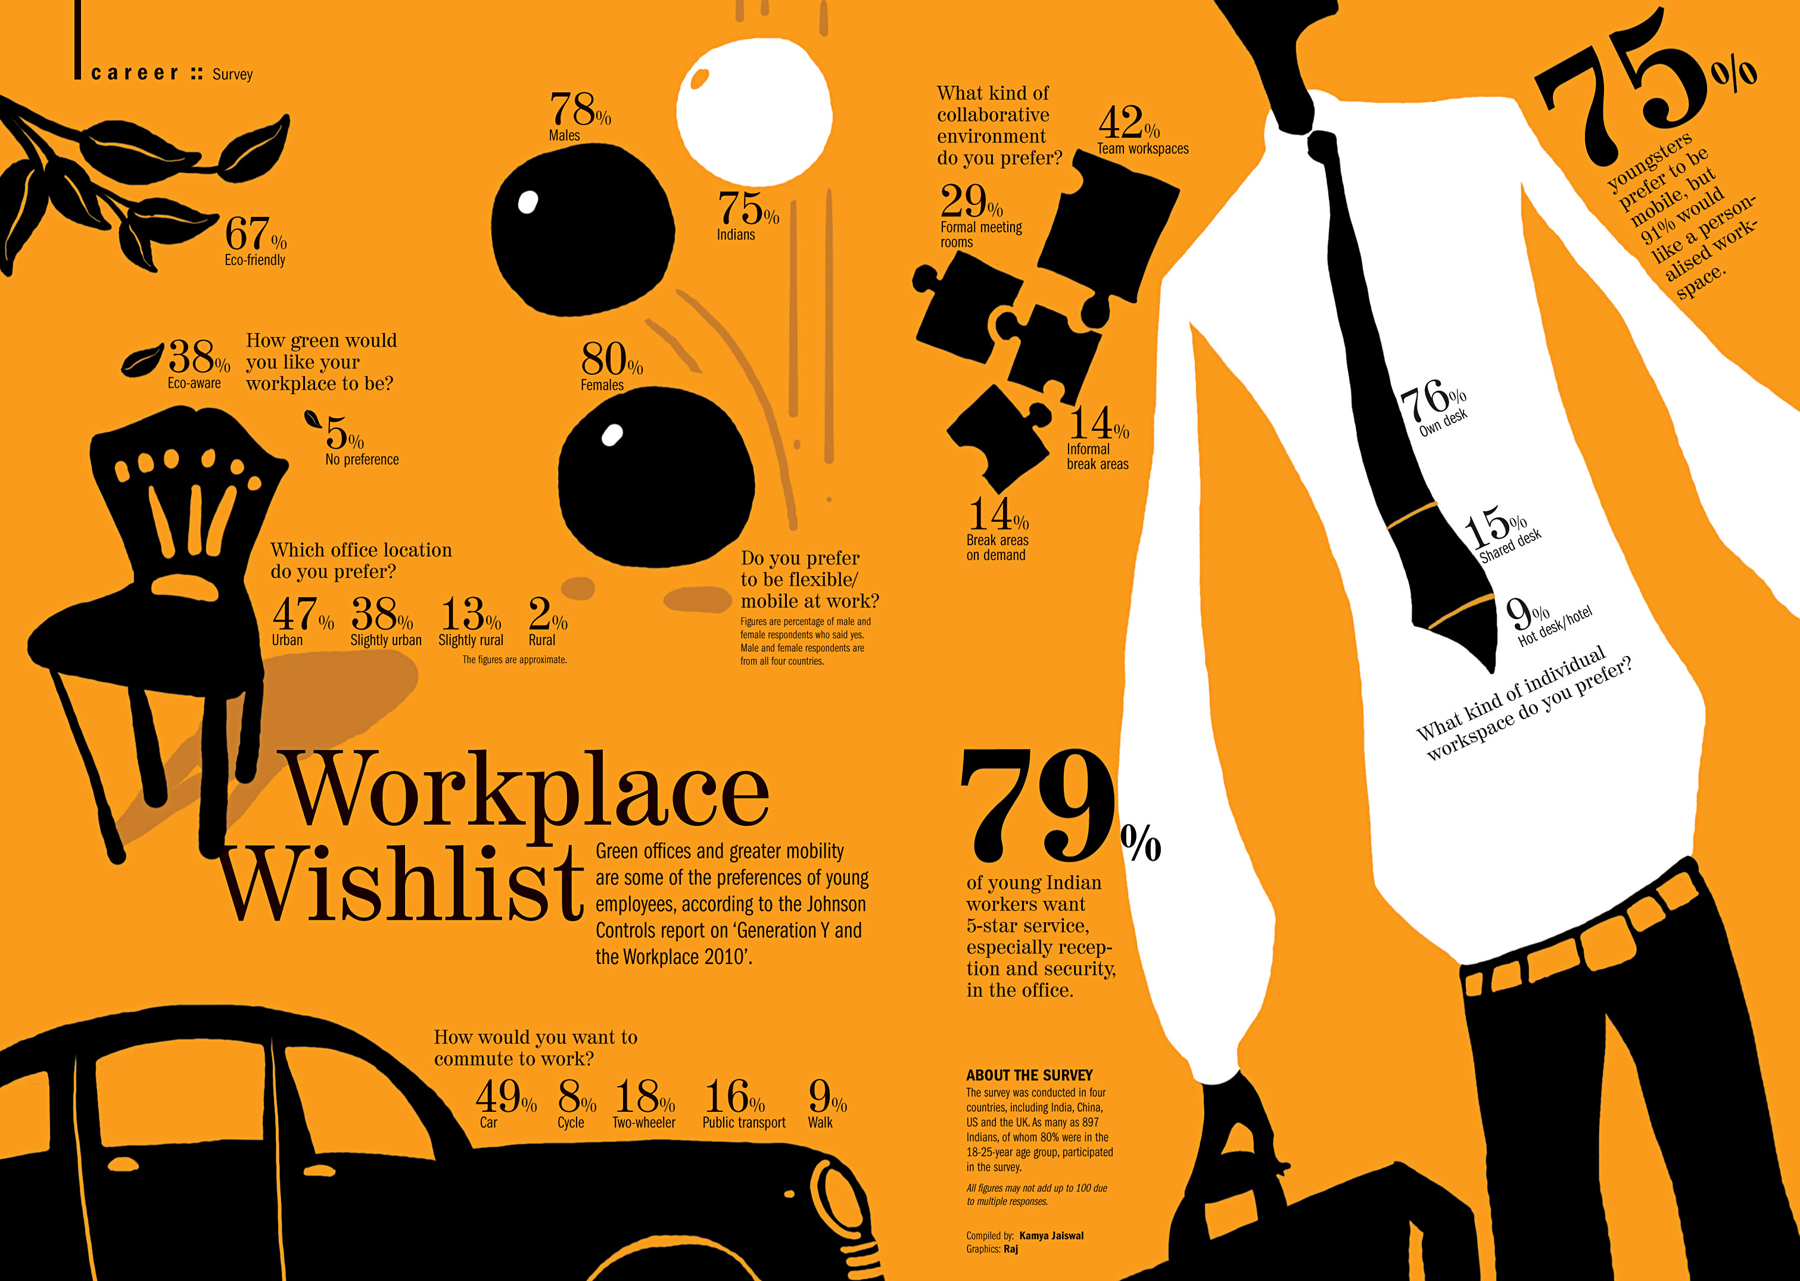 Green offices and greater mobility are same of the preferences of young employees.